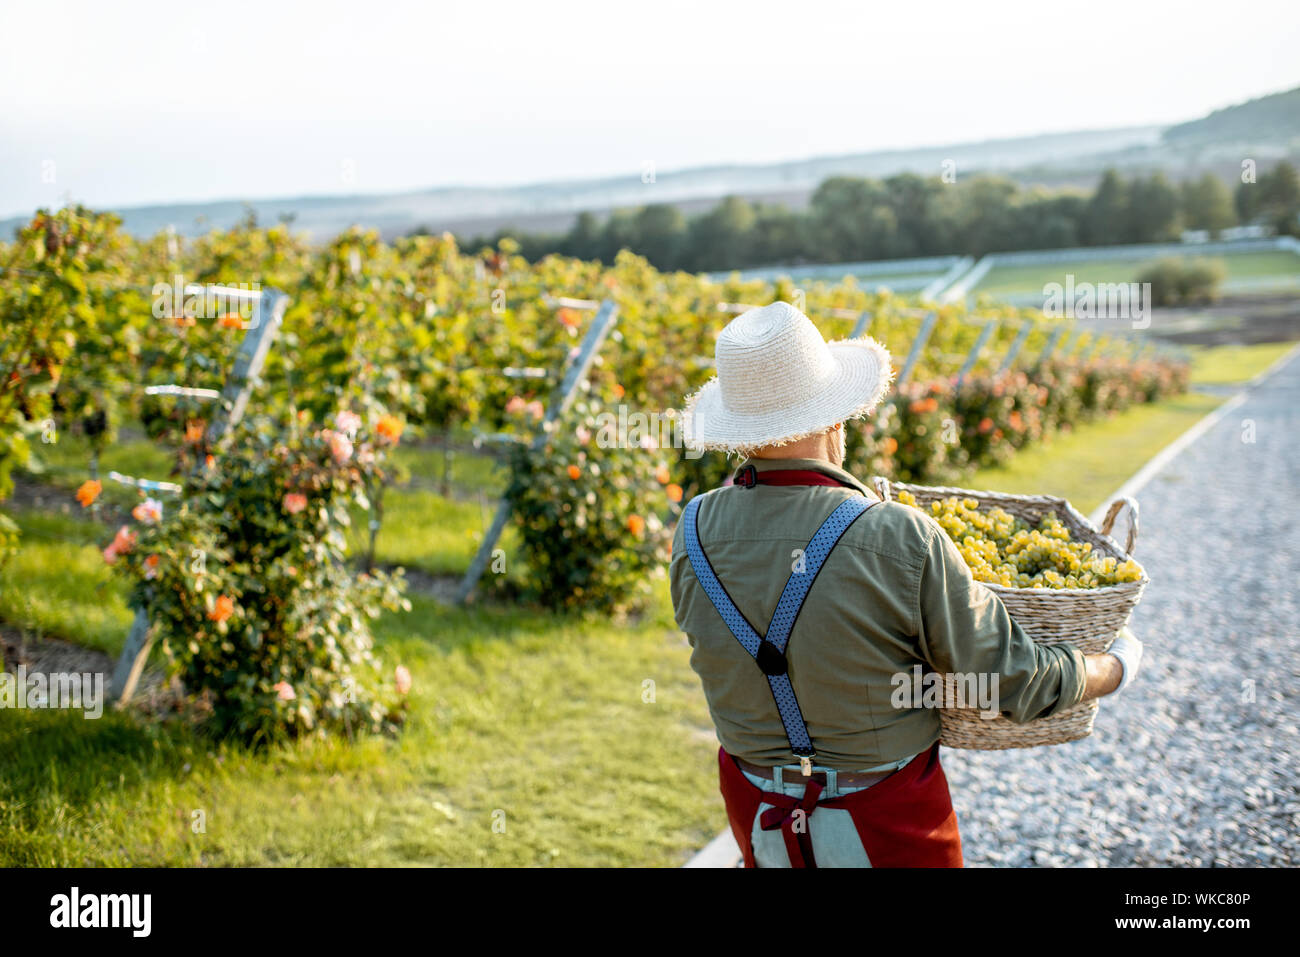 Senior winemaker walking with basket full of freshly picked up wine grapes, harvesting on the vineyard during a sunny evening, rear view Stock Photo